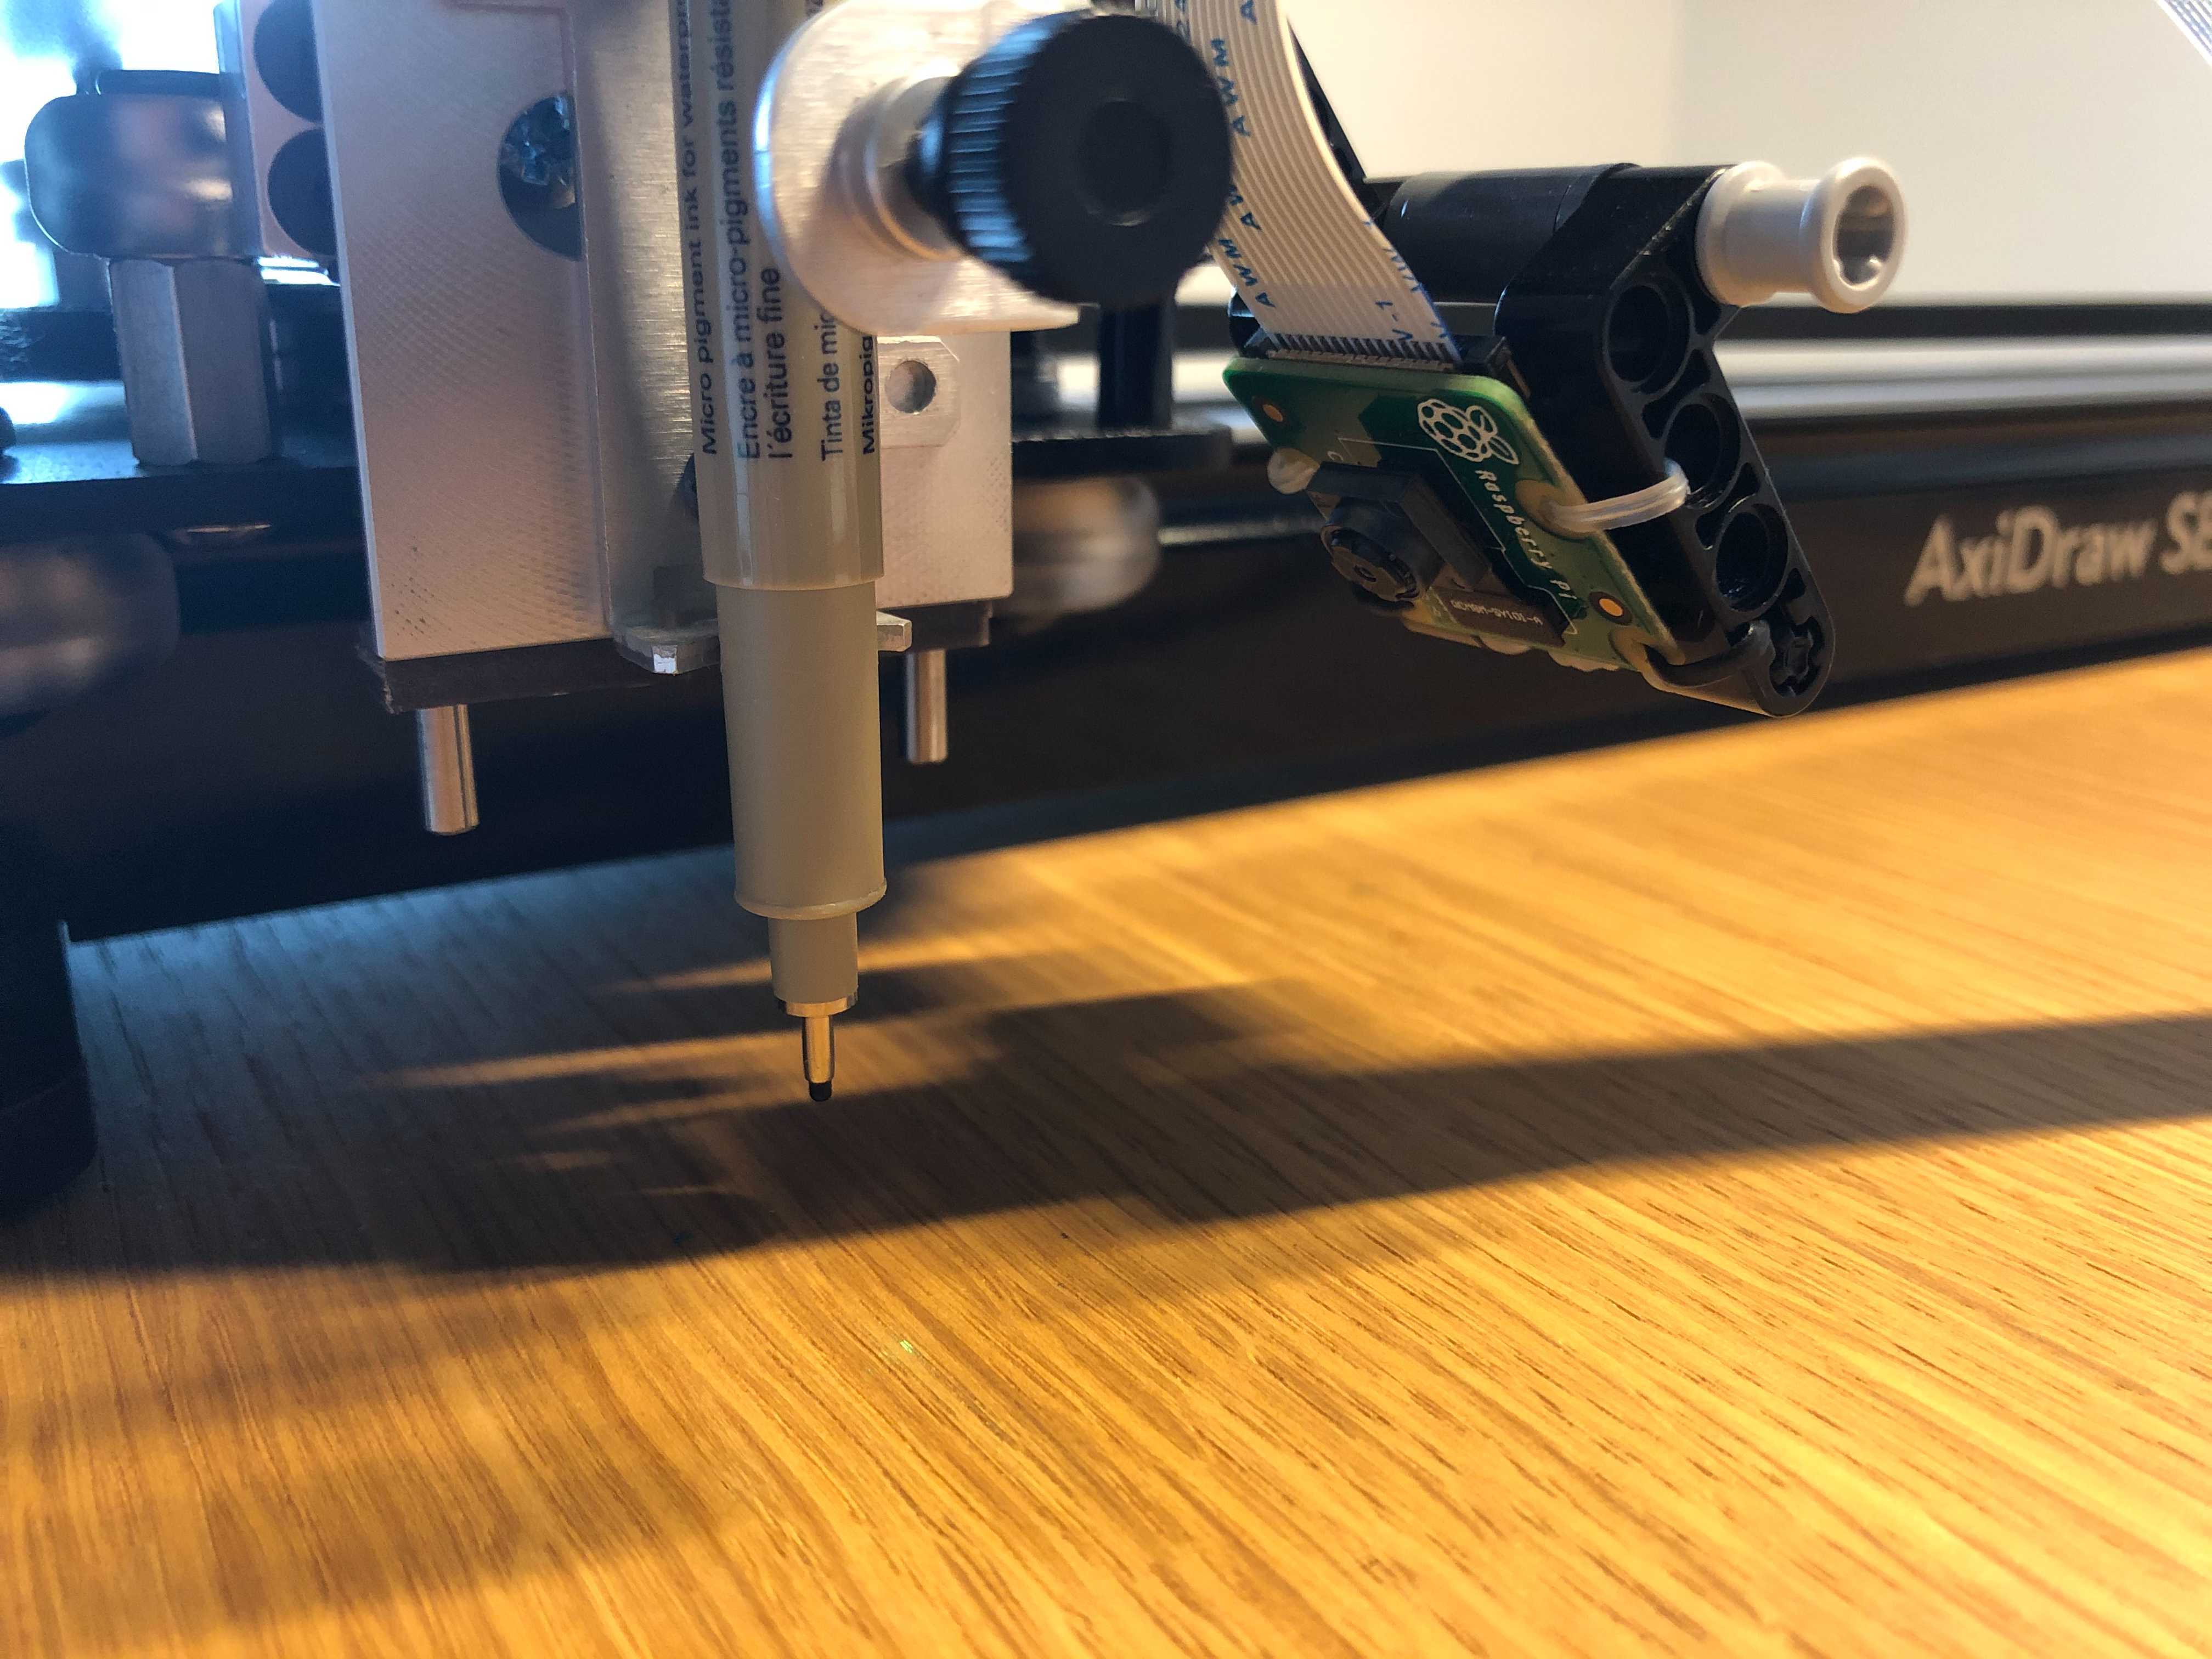 Camera mounted on the plotter